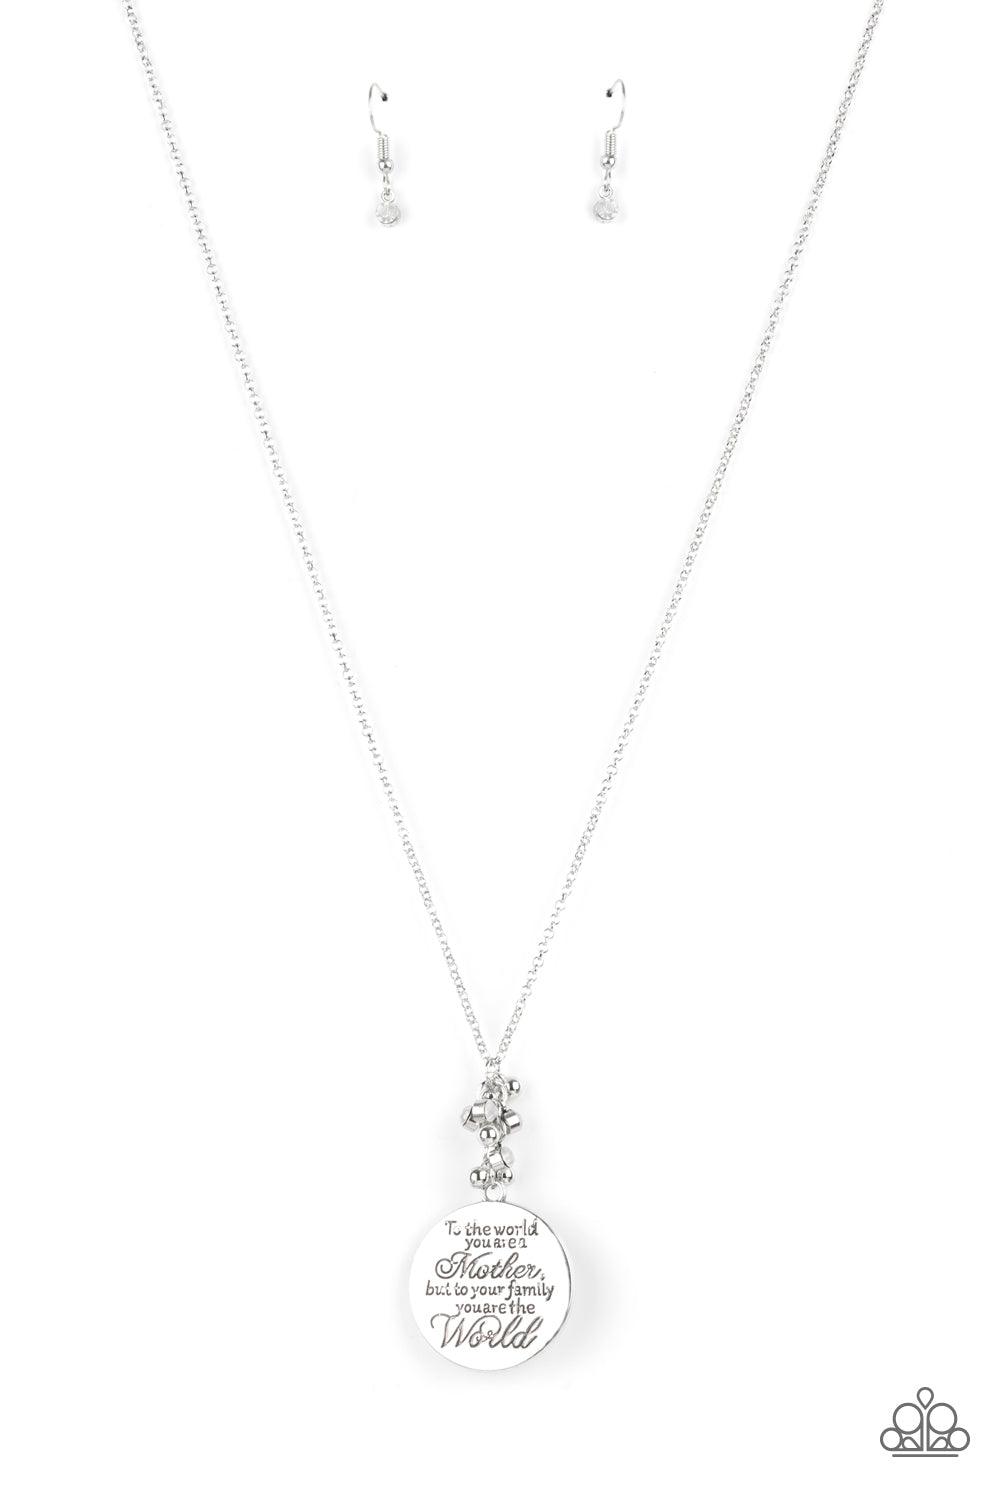 Paparazzi Accessories Maternal Blessings - White A silver disc inscribed with the phrase, "To the world you are a Mother, but to your family you are the World," creates a sweet reminder as it falls from a lengthened silver chain. A sprinkle of dainty whit